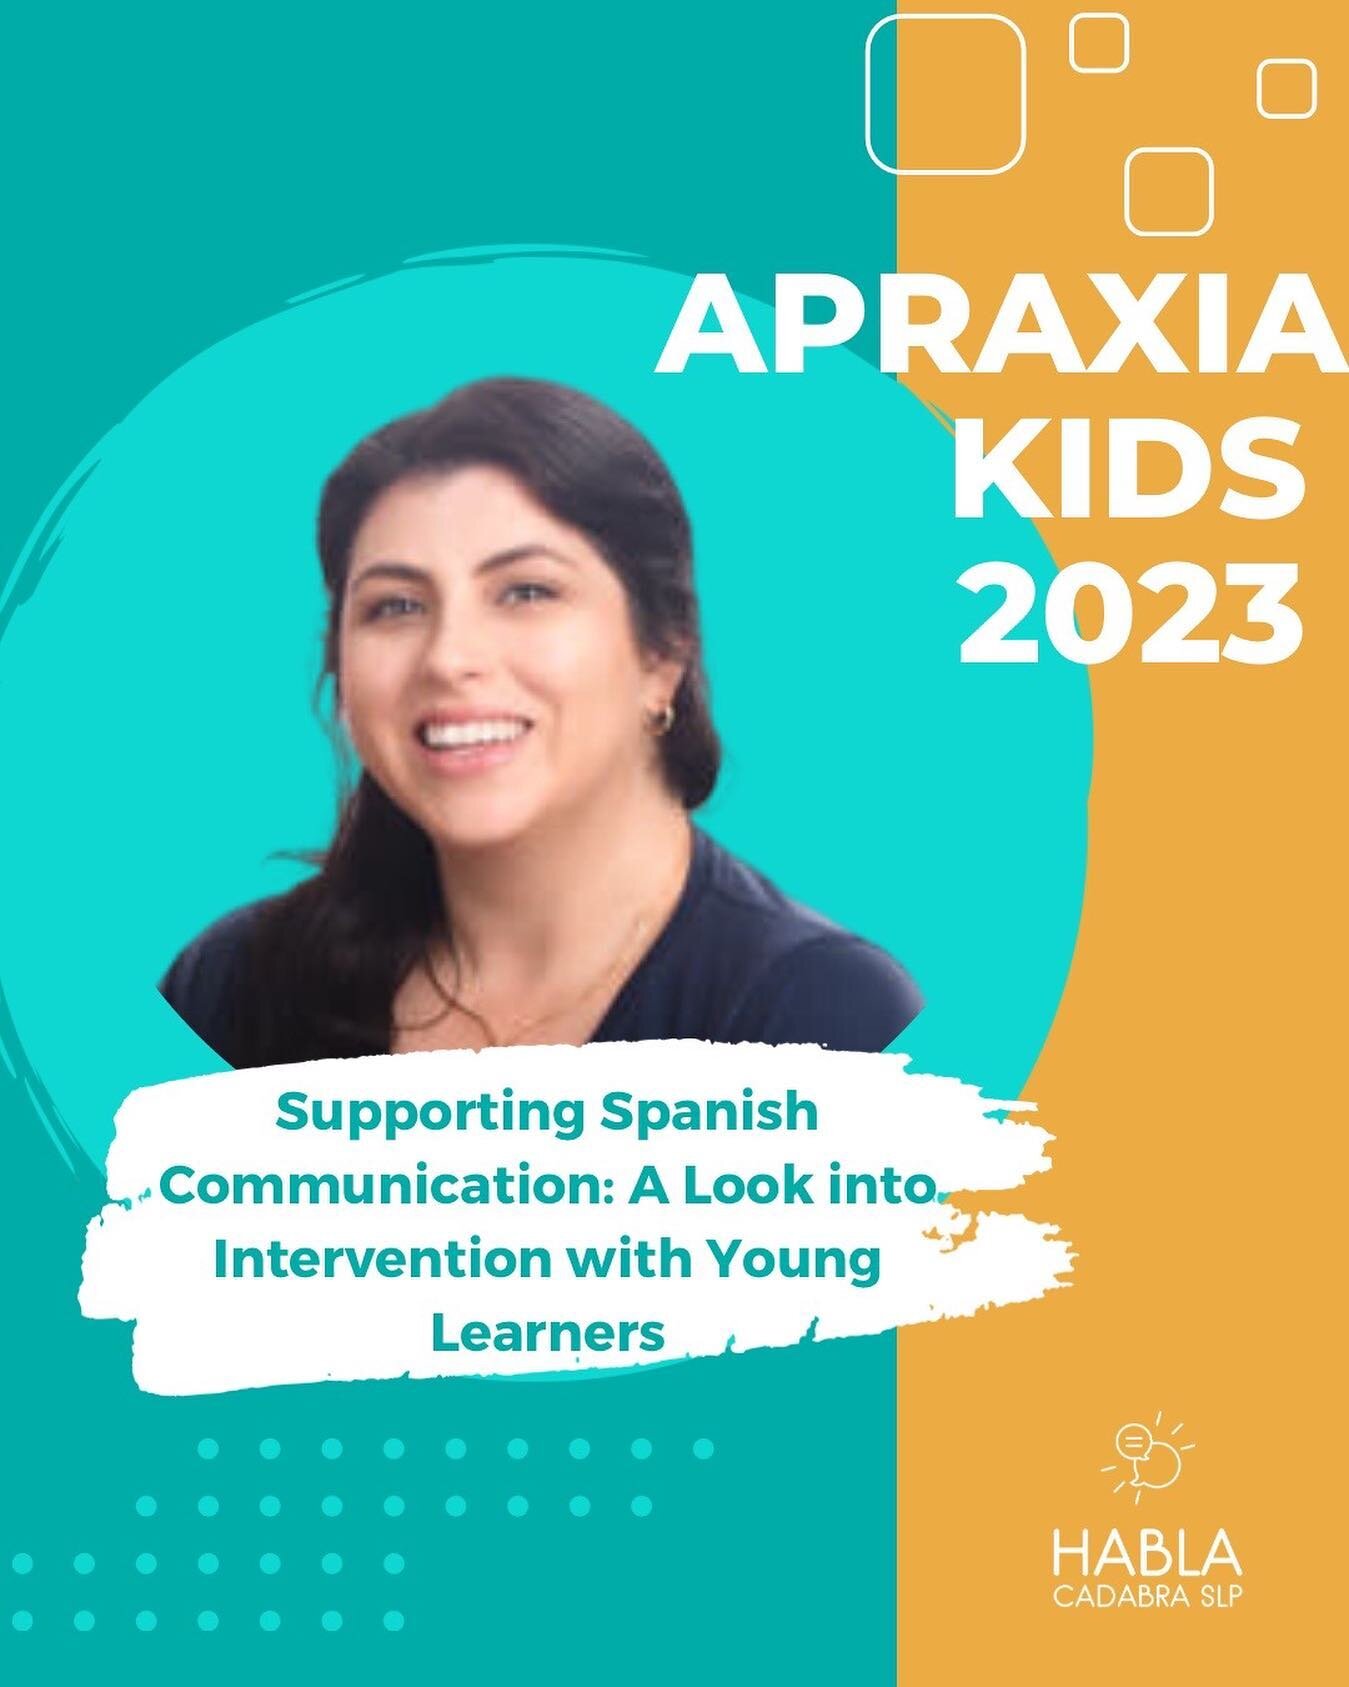 So excited to announce Pilar and I will be attending and presenting for the first time at the National Apraxia Kids Conference! 

It is estimated that 1/3 of US children under the age of 9 speak a language other than English at home, of which 75% spe